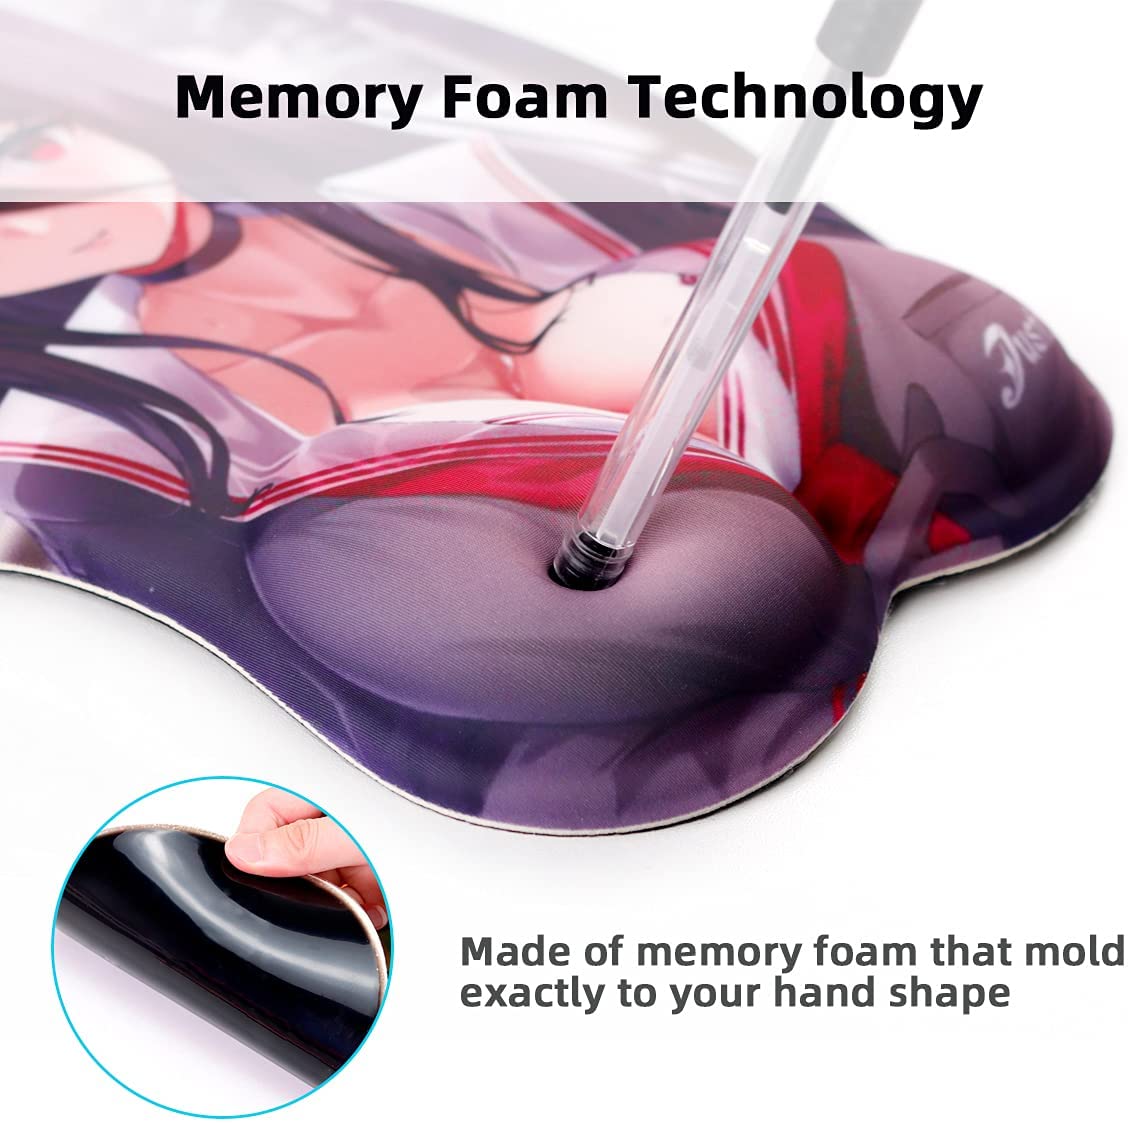 3D Anime Beautiful Girl Beauty Wrist Support Mousepad - Cartoon Non-Slip Gaming Mouse Pads, Silicone Anime Cute Girl Mouse Mat for Computer,Laptop-Classical Beauty - image 5 of 6